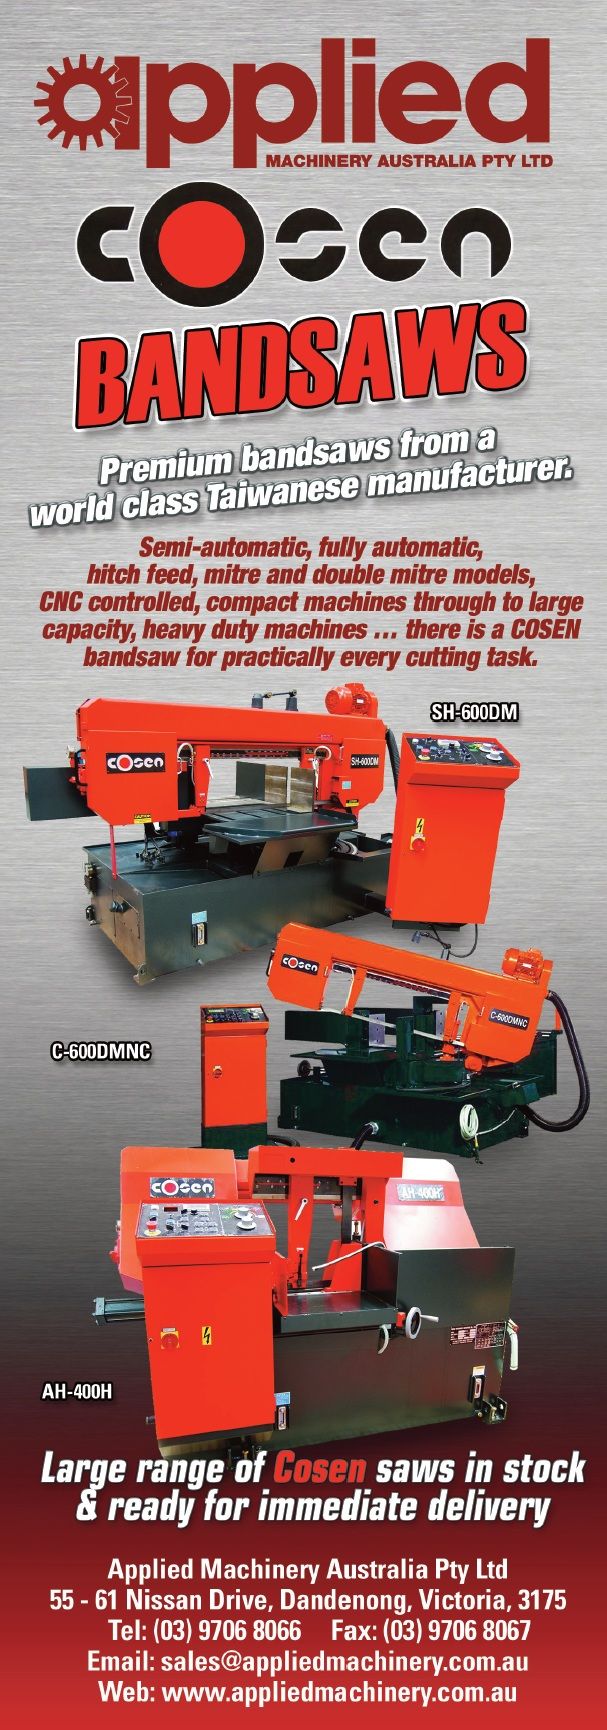 Cosen-Bandsaws-Applied-Machinery